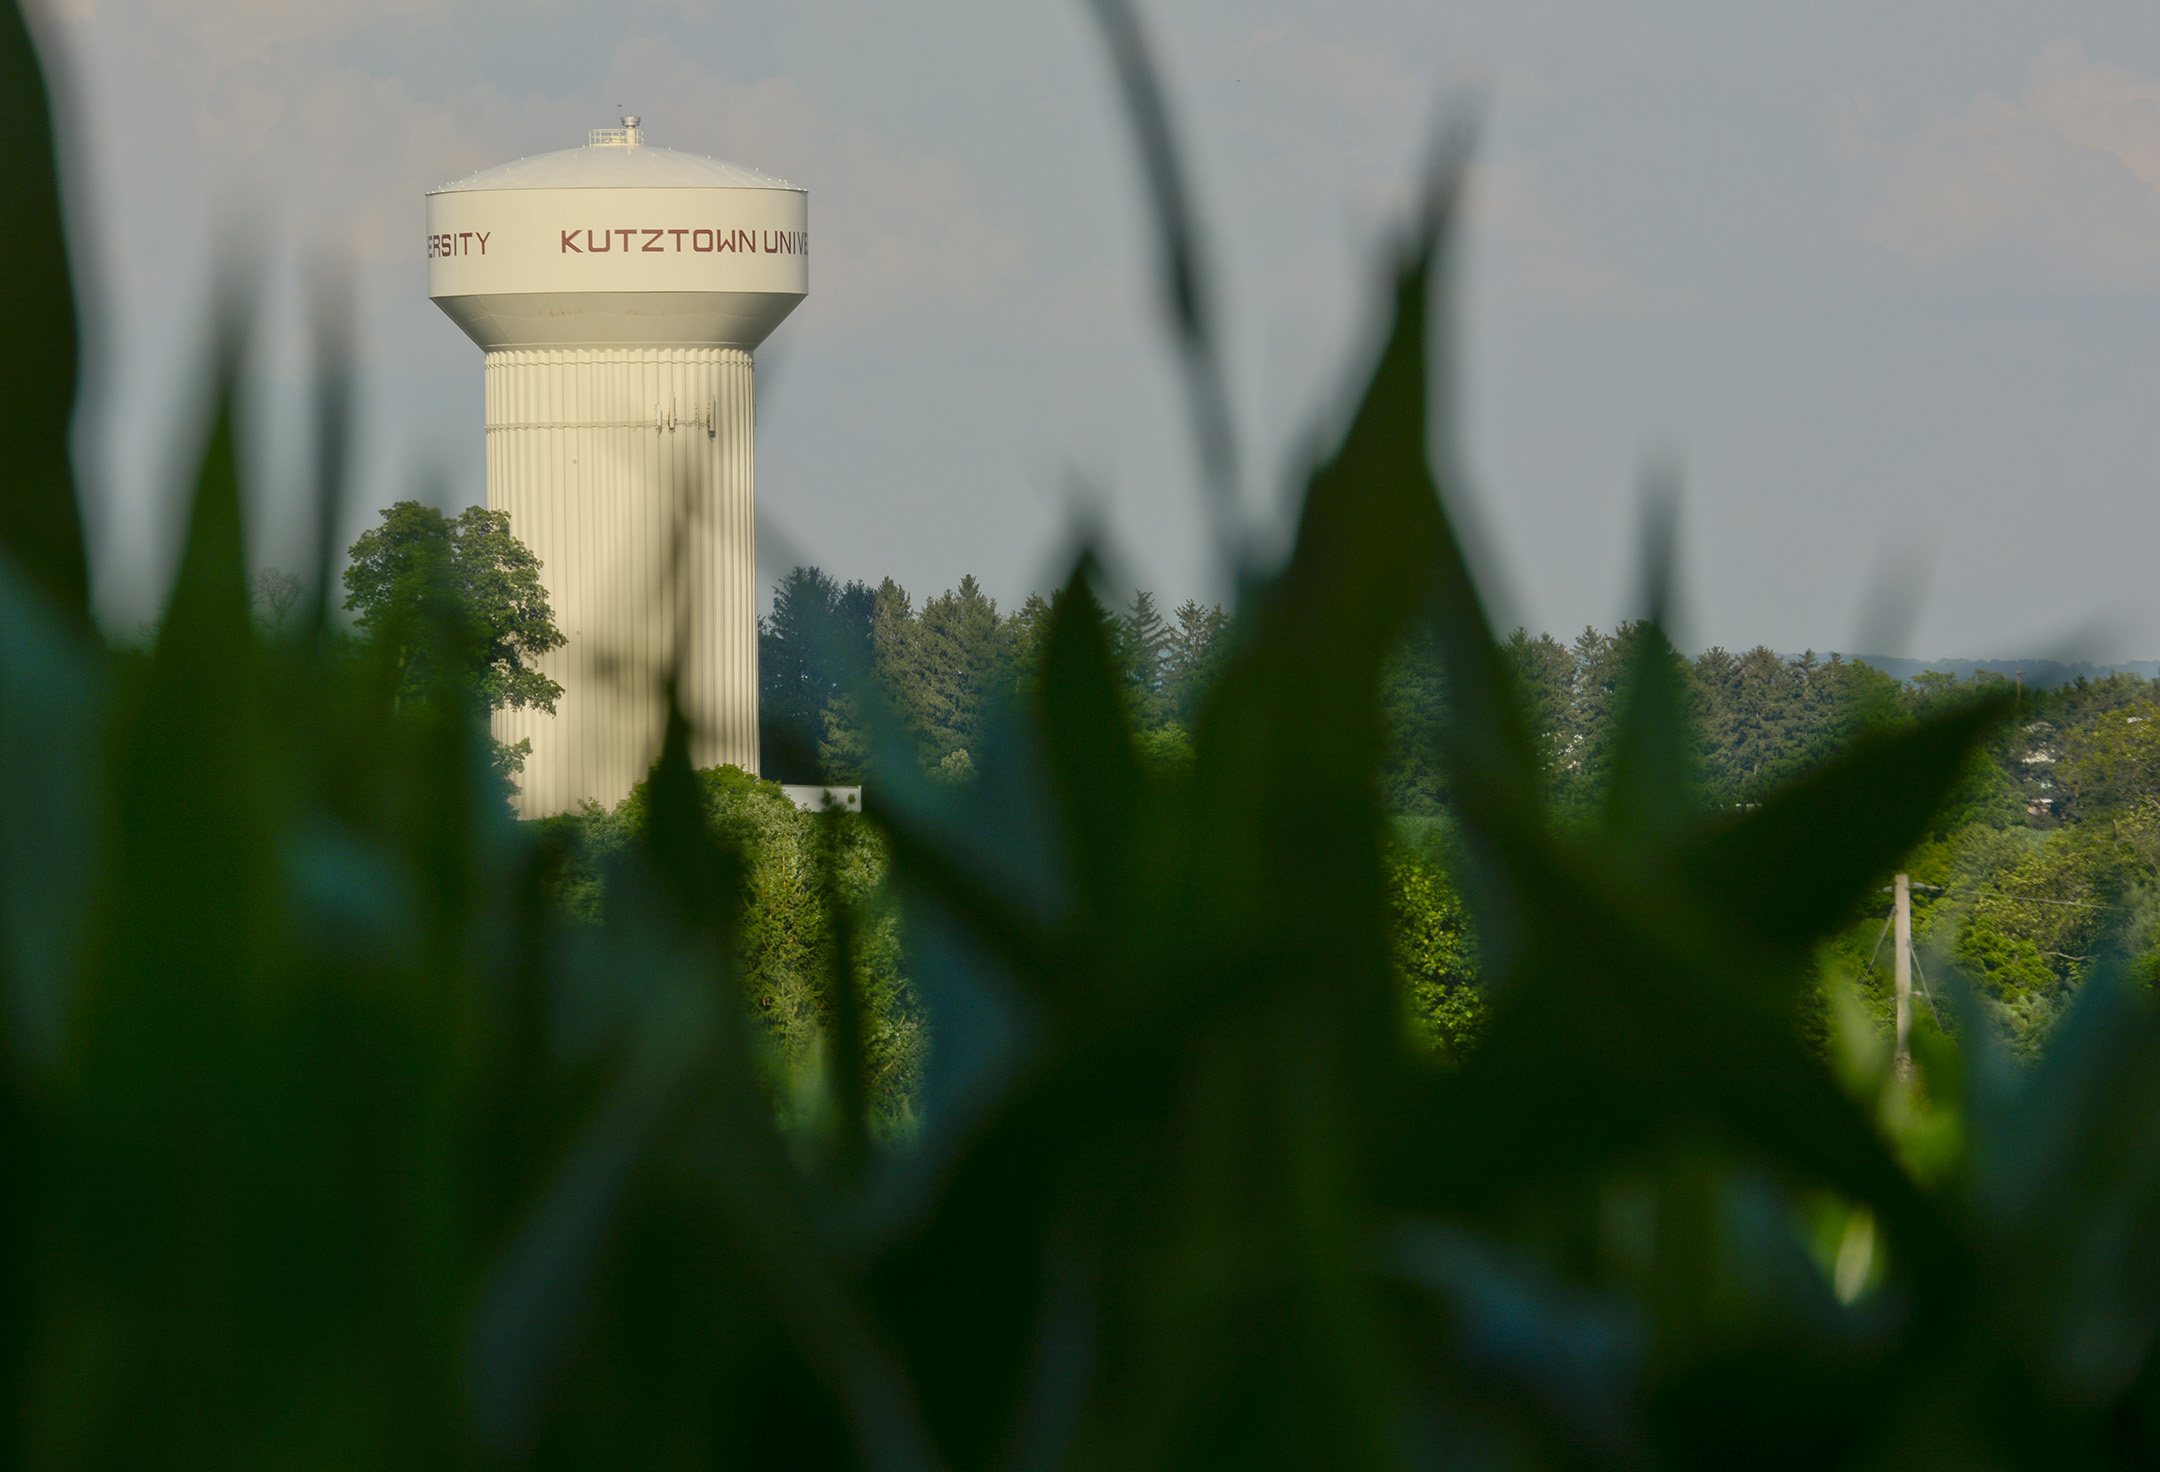  The Kutztown University water tower is visible from one of the Angstadt's cornfields. 